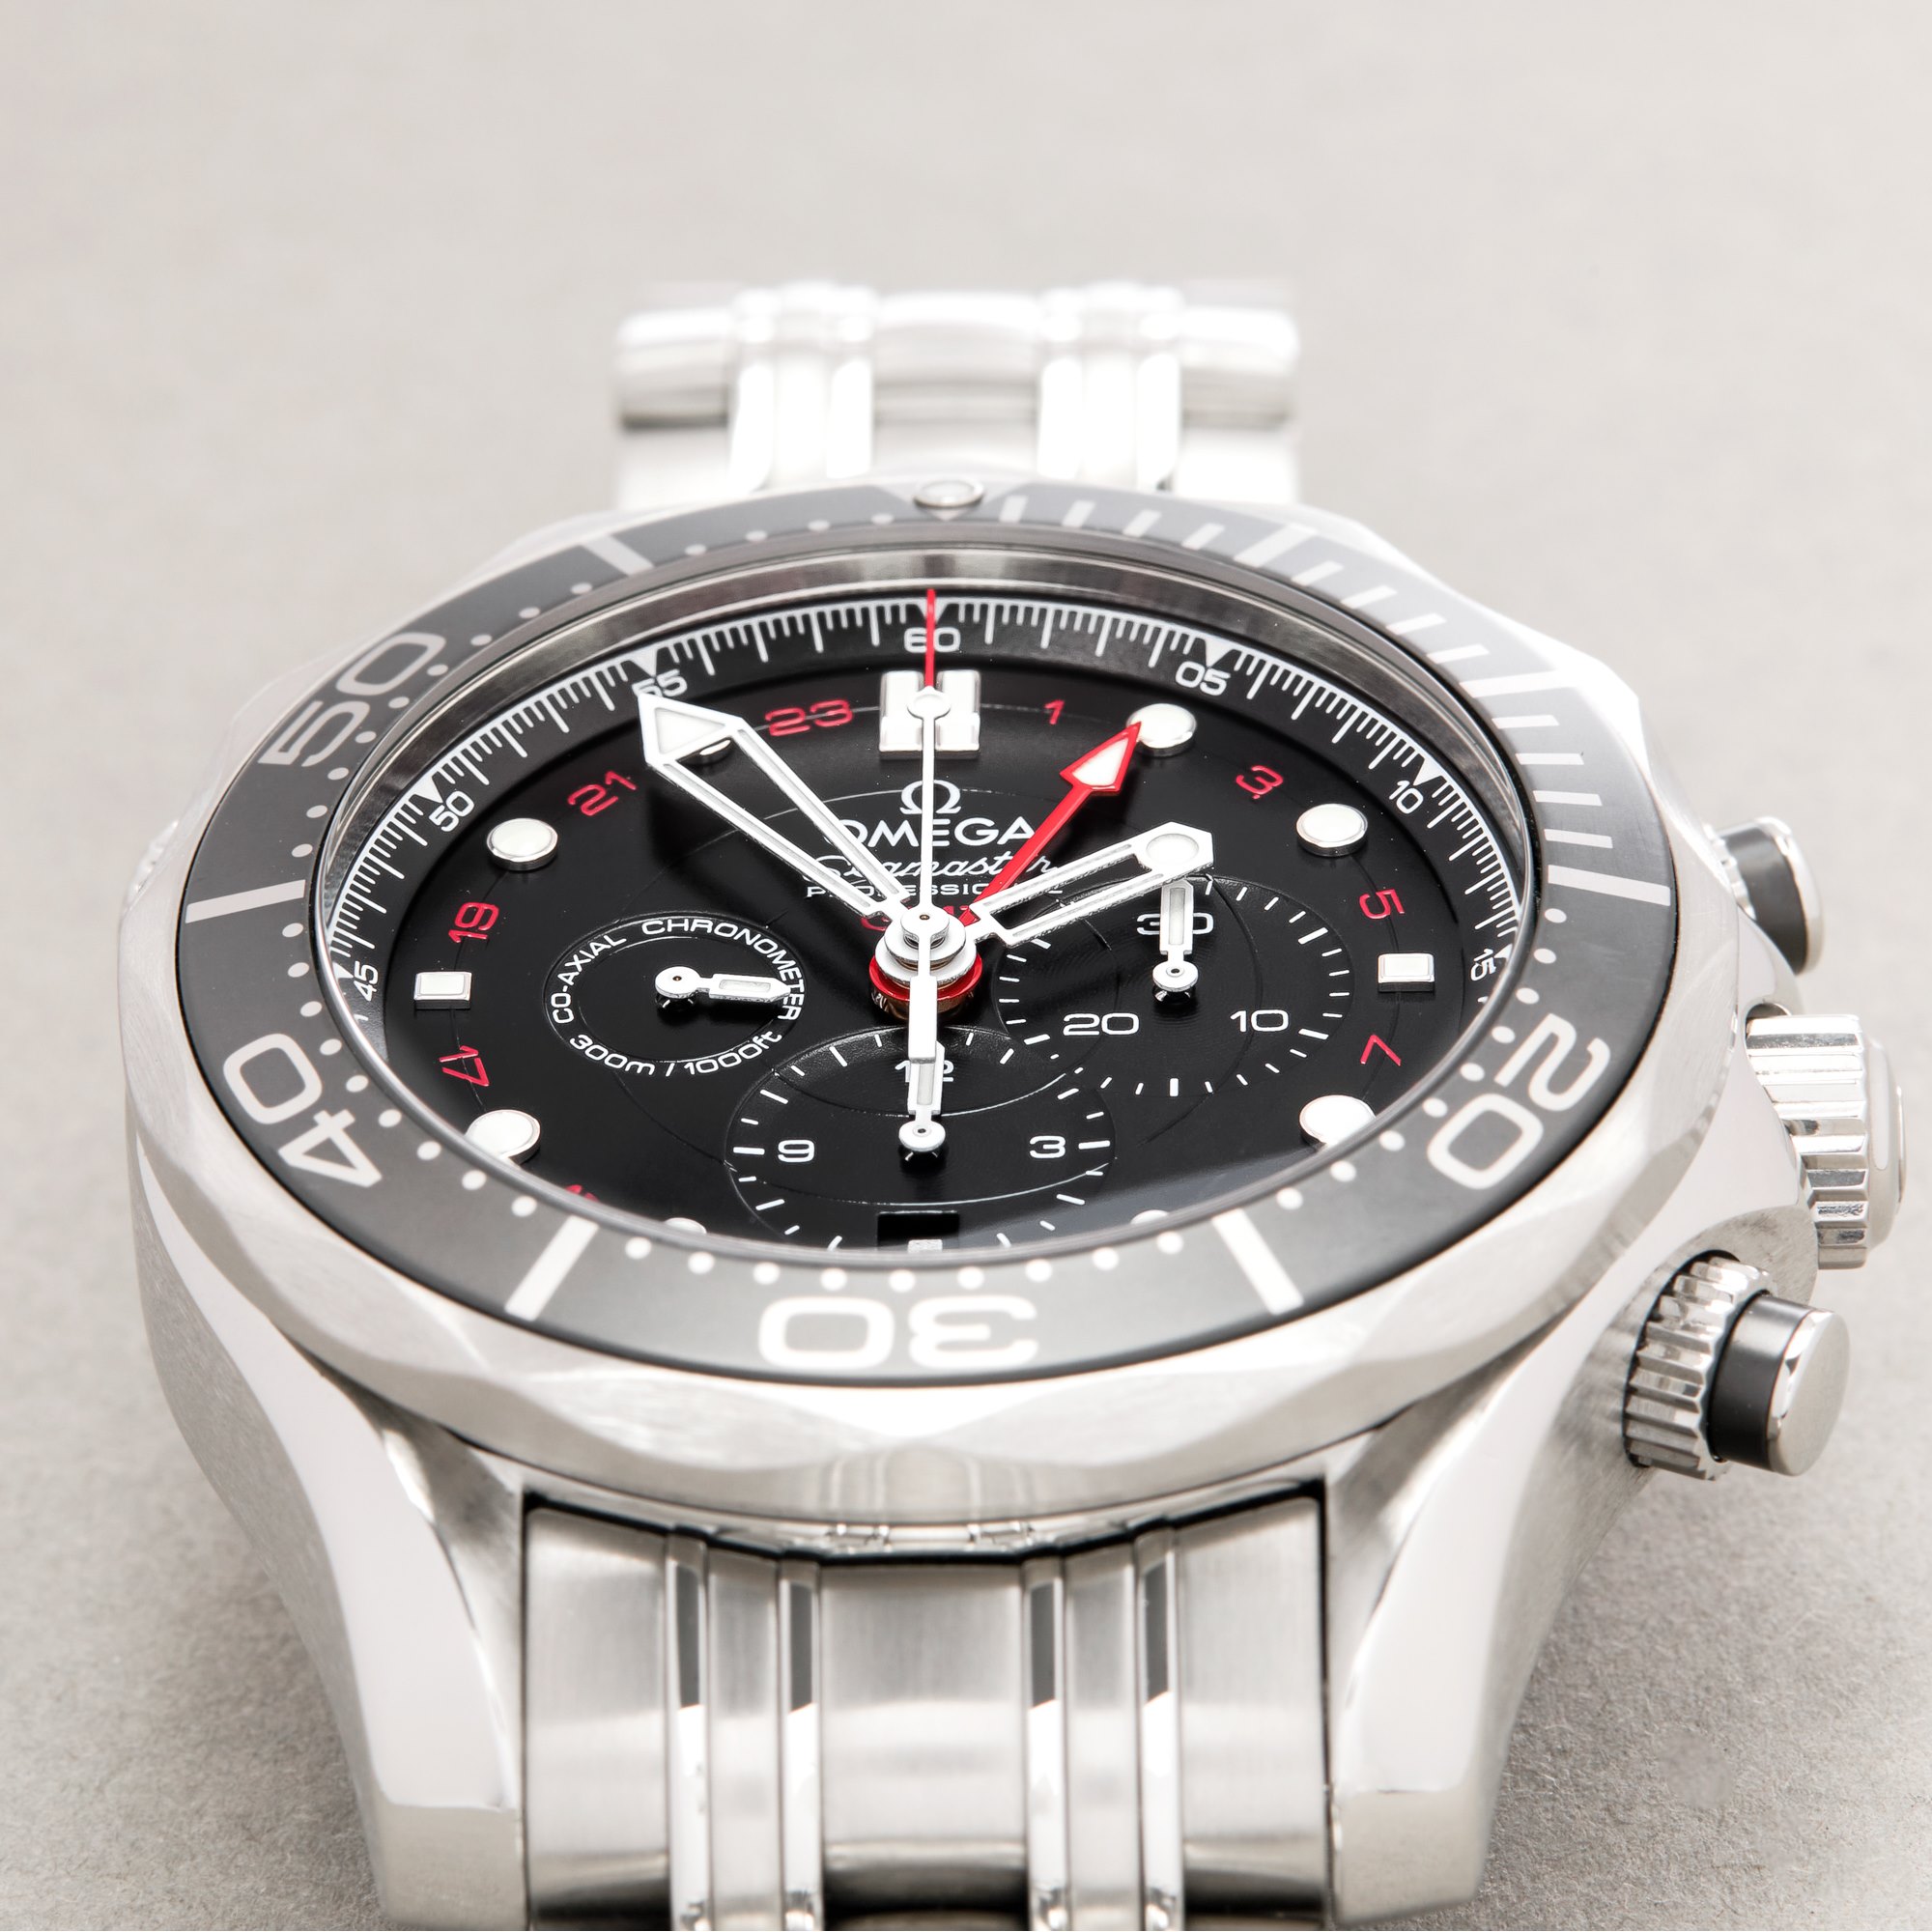 Omega Seamaster GMT Chronograph Stainless Steel 212.30.44.52.01.001